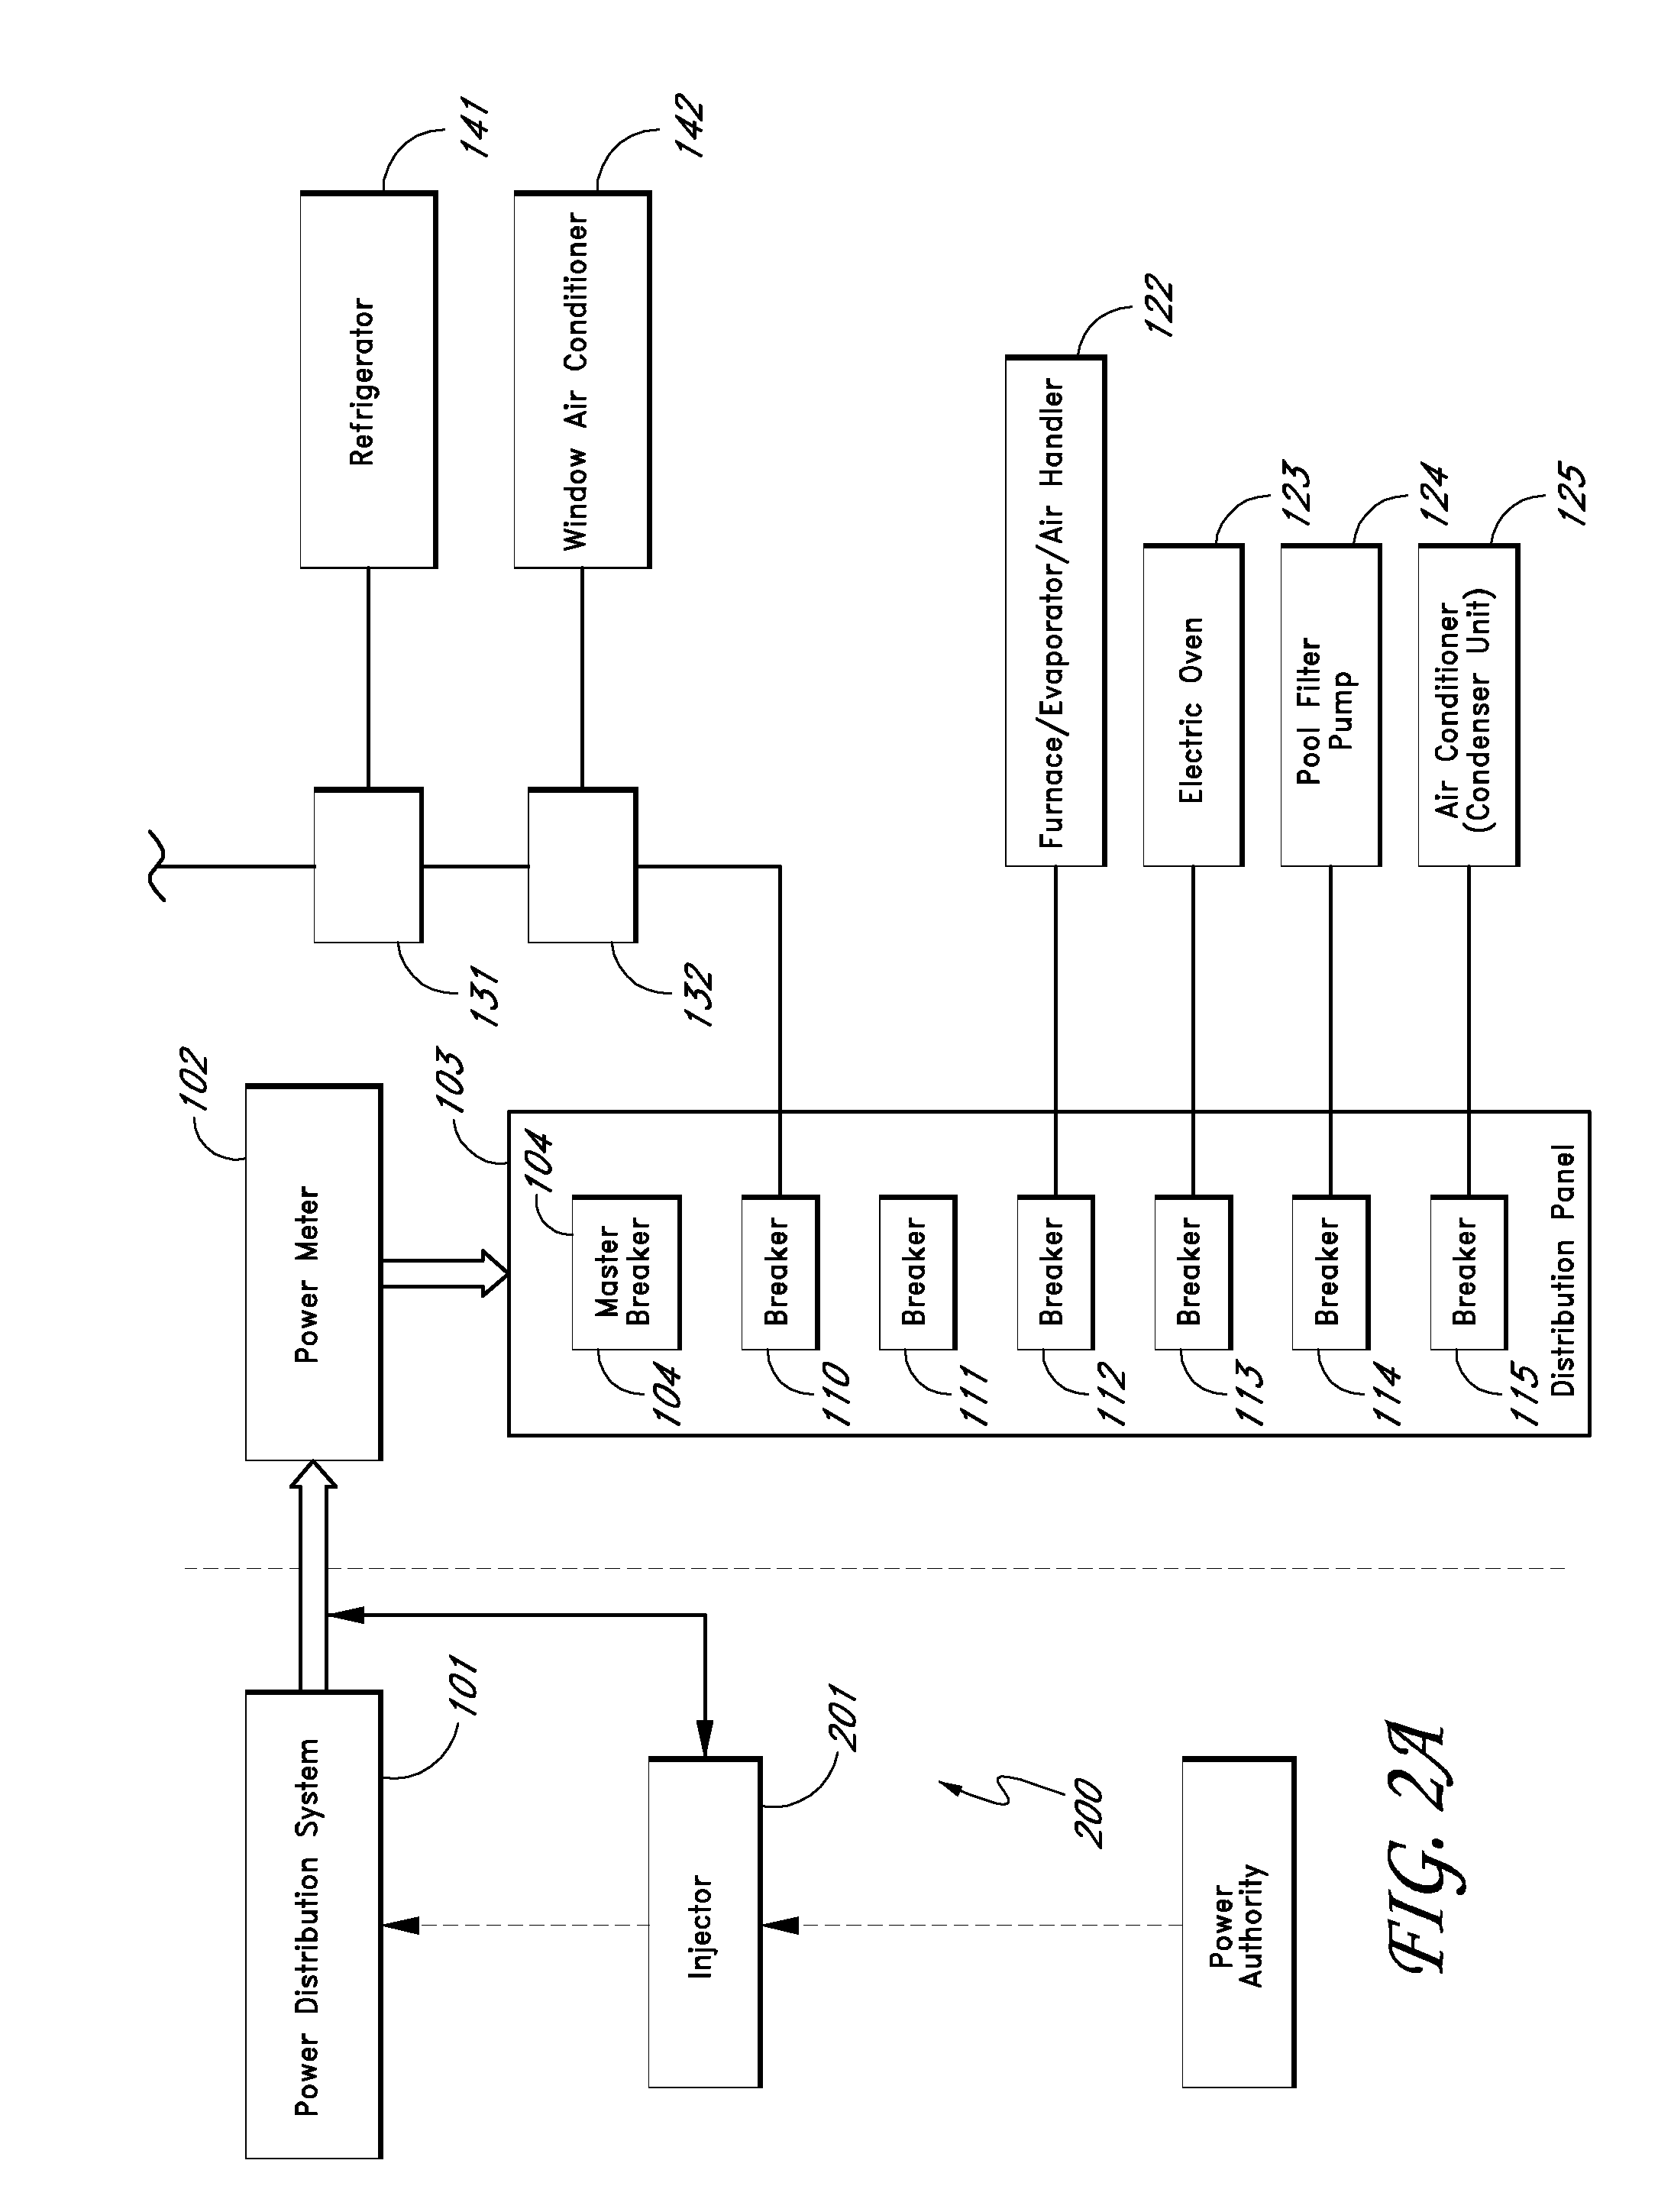 Method and apparatus for power-limiting electrical access